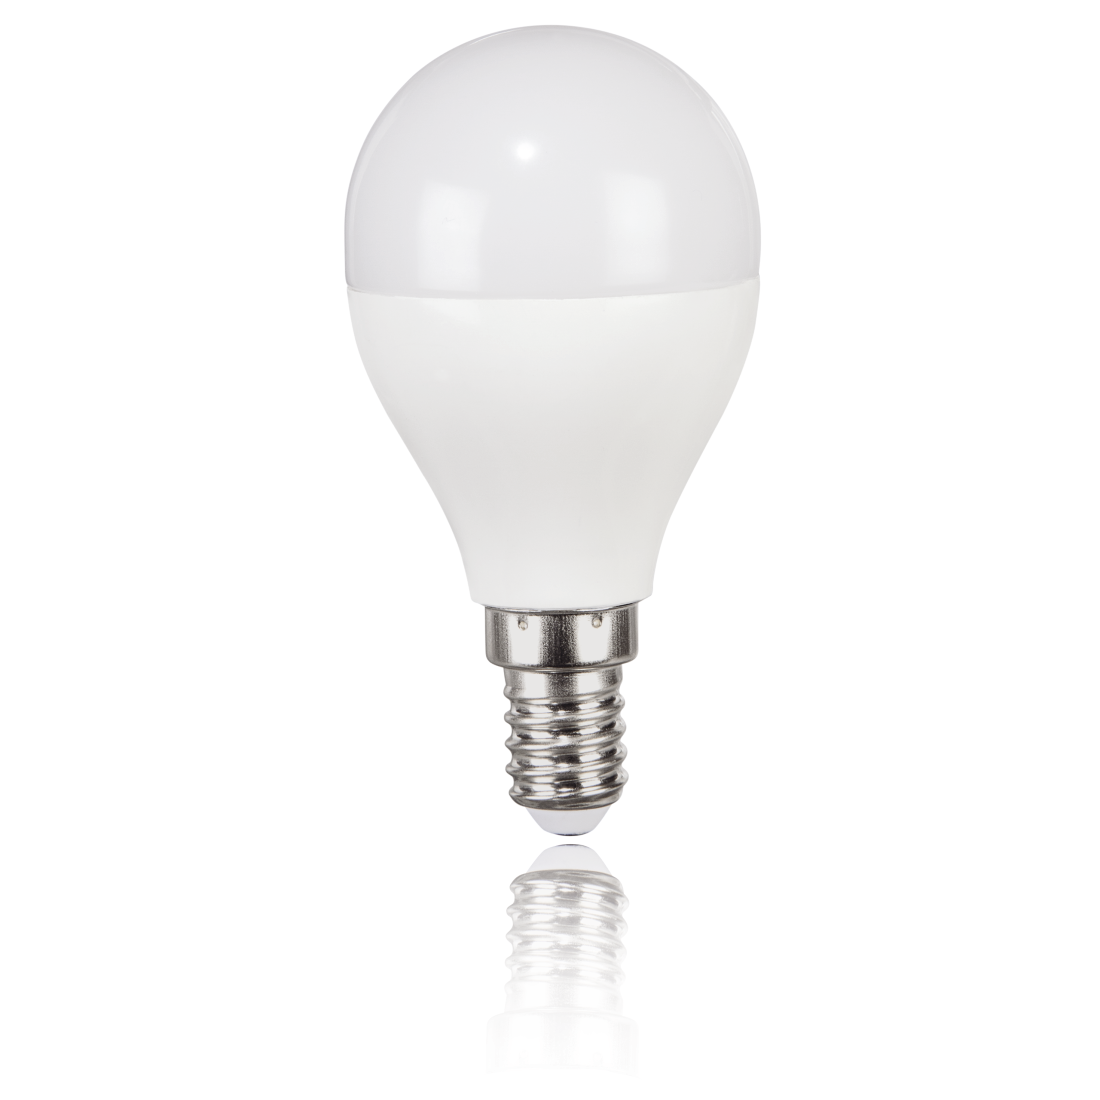 abx2 High-Res Image 2 - Xavax, LED Bulb, E14, 470lm Replaces 40W, Drop Bulb, daylight